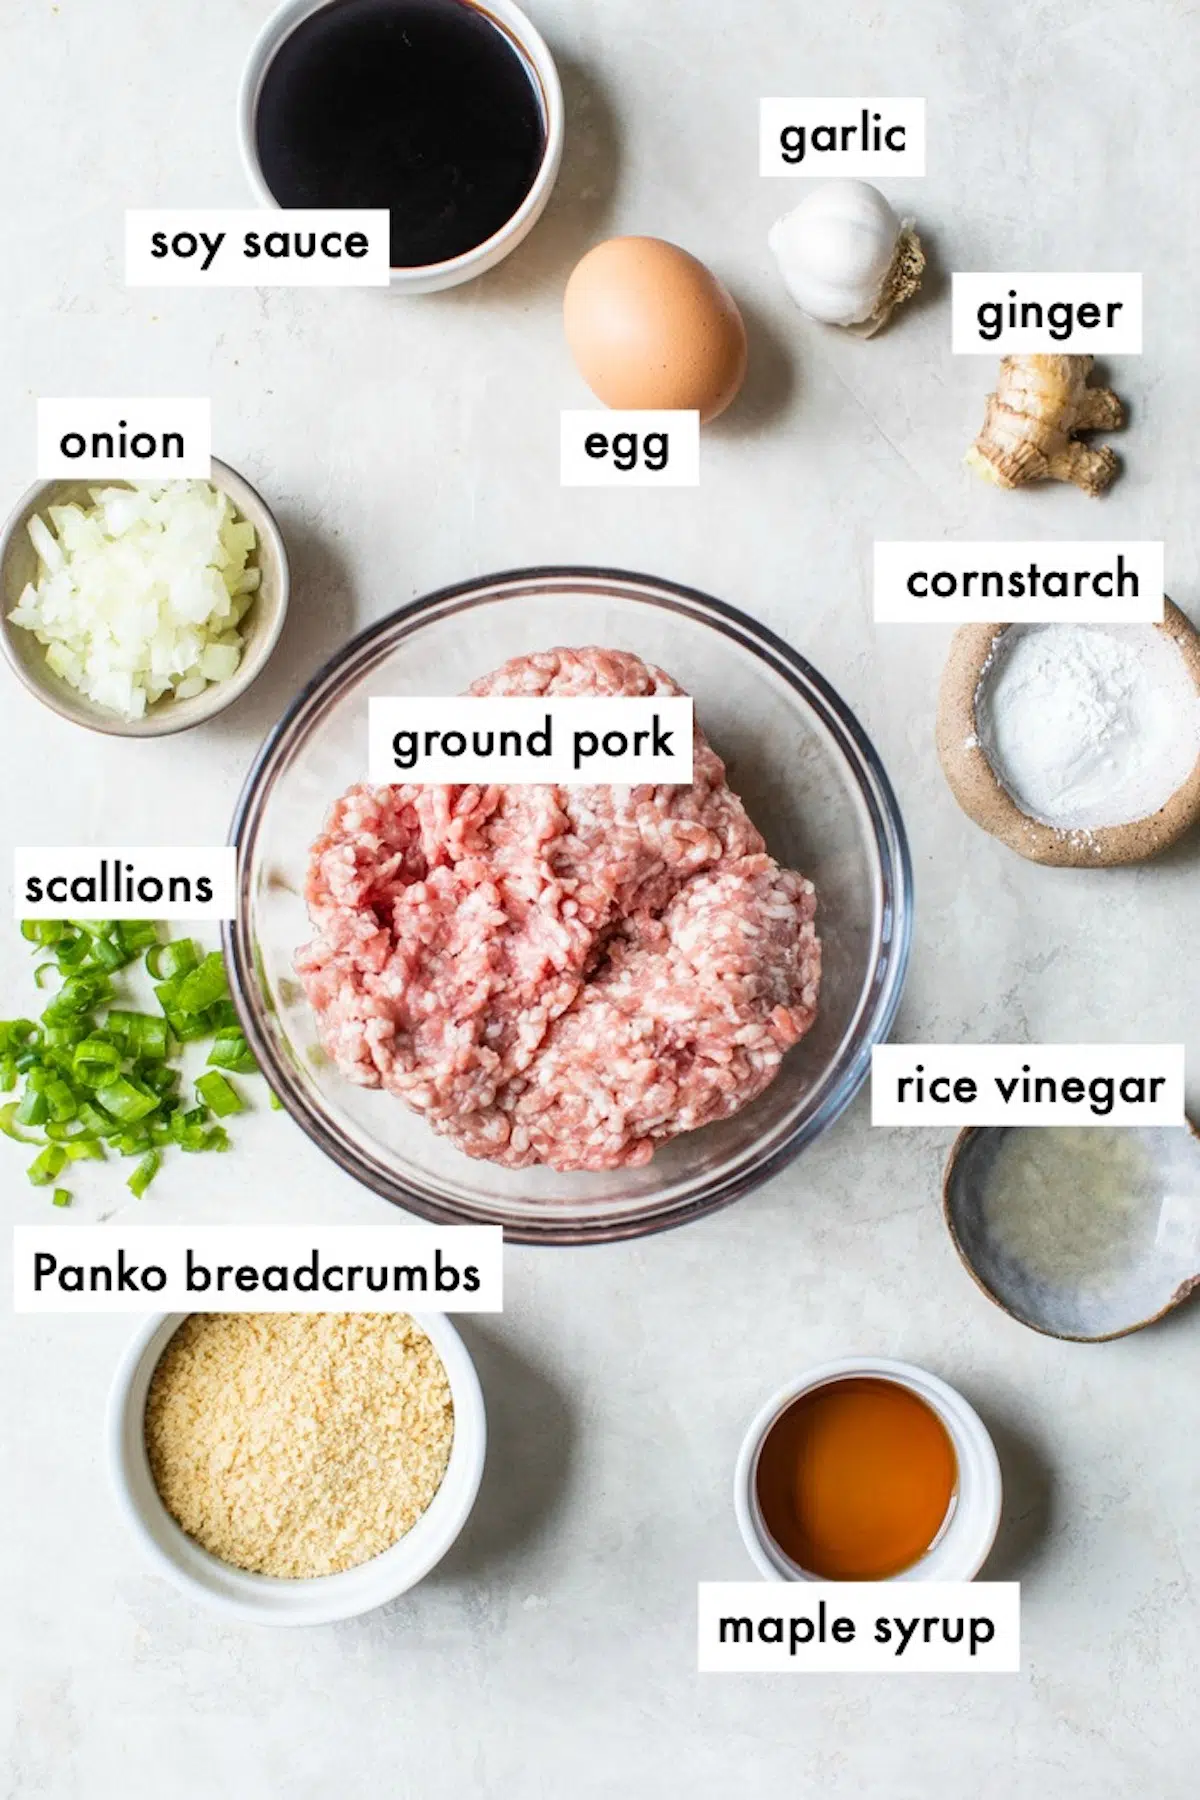 ingredients to make meatballs like ground pork, soy sauce and breadcrumbs